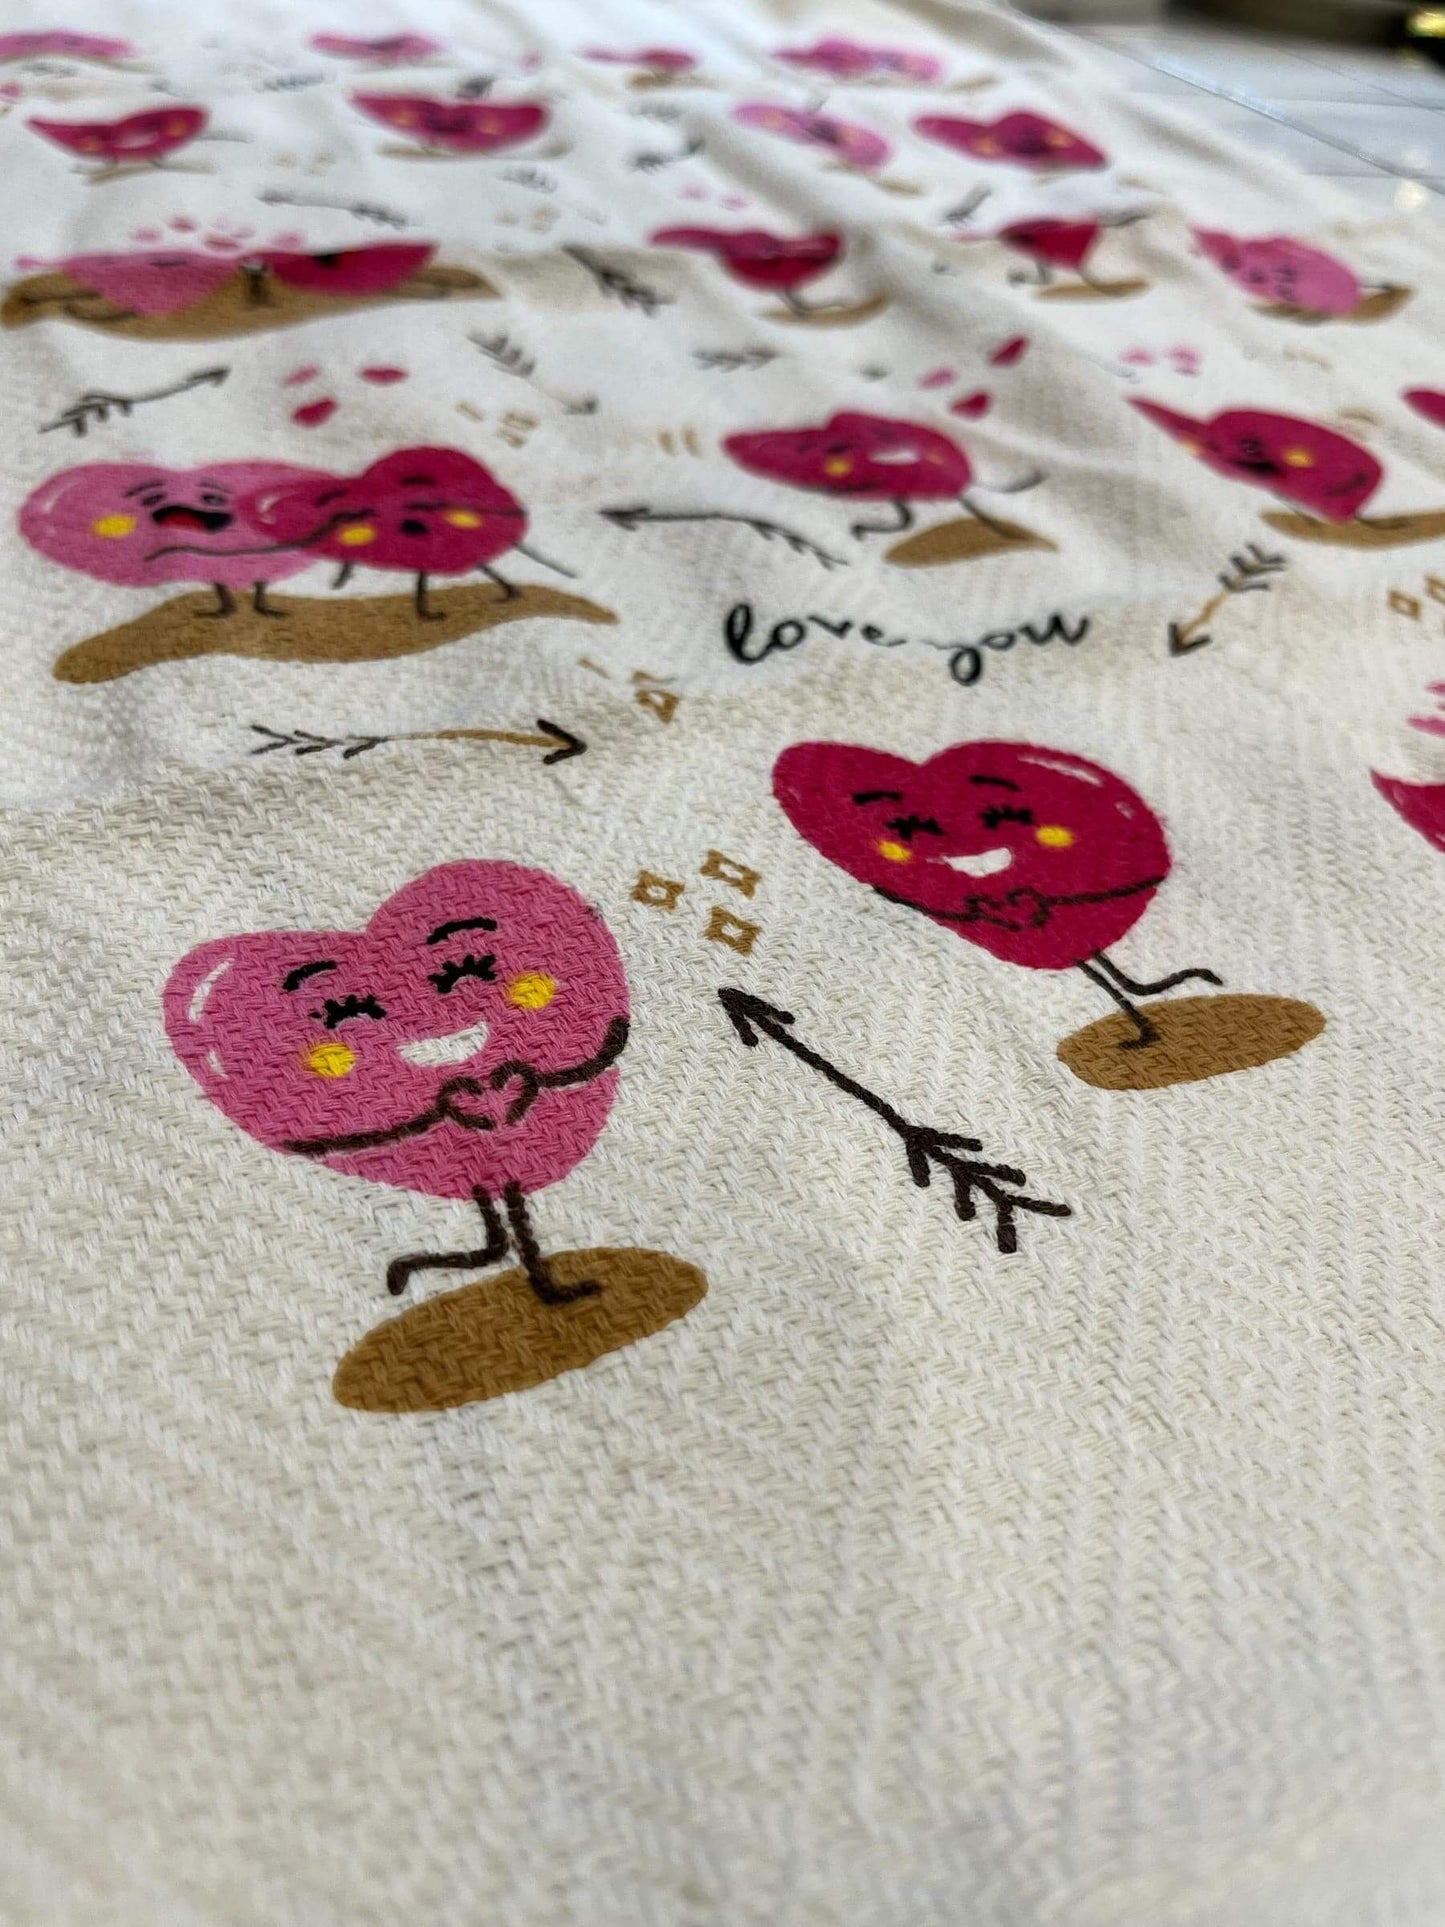 Tea Towels (Cotton Kitchen Towels) Hearts100% Cotton Tea Towel, made in Turkey, These towels offer premium quality with their pure cotton composition, ensuring high absorbency for drying dishes and versatile use in various kitchen tasks. Their durability